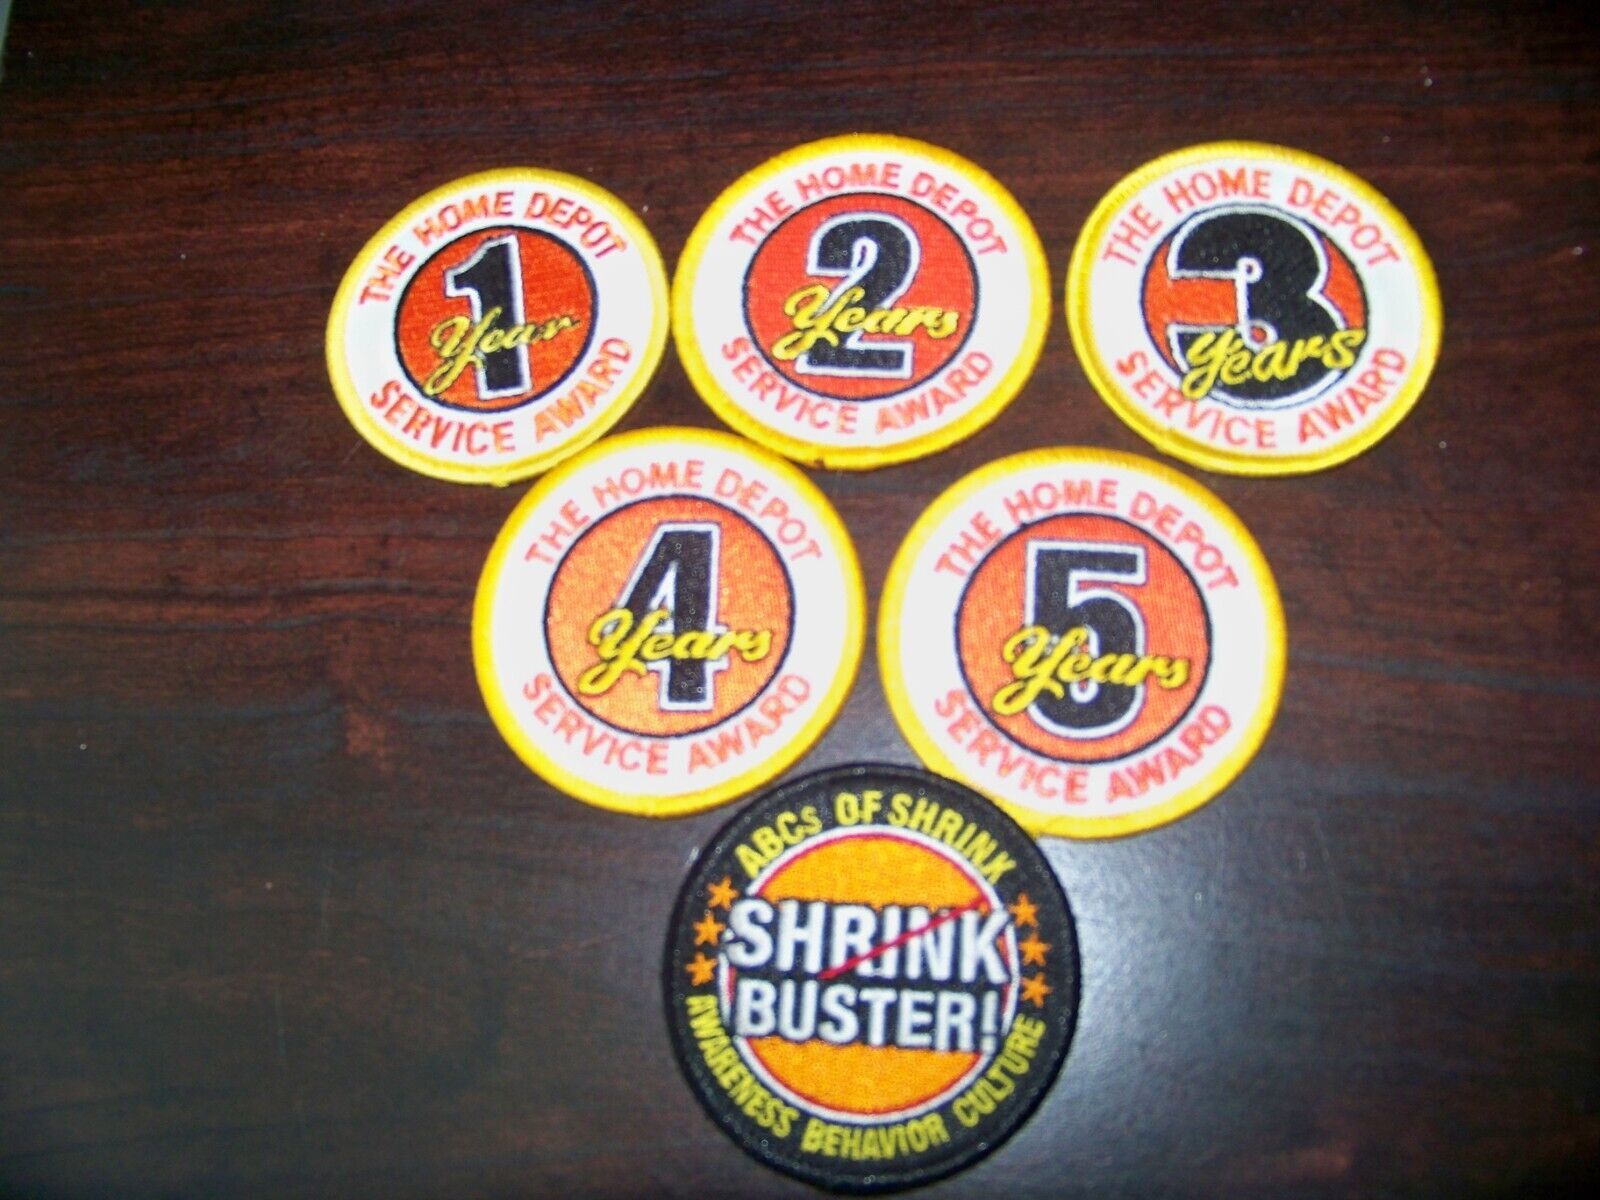 6 HOME DEPOT NEW PATCHES SERVICE AWARDS + SHRINK BUSTER